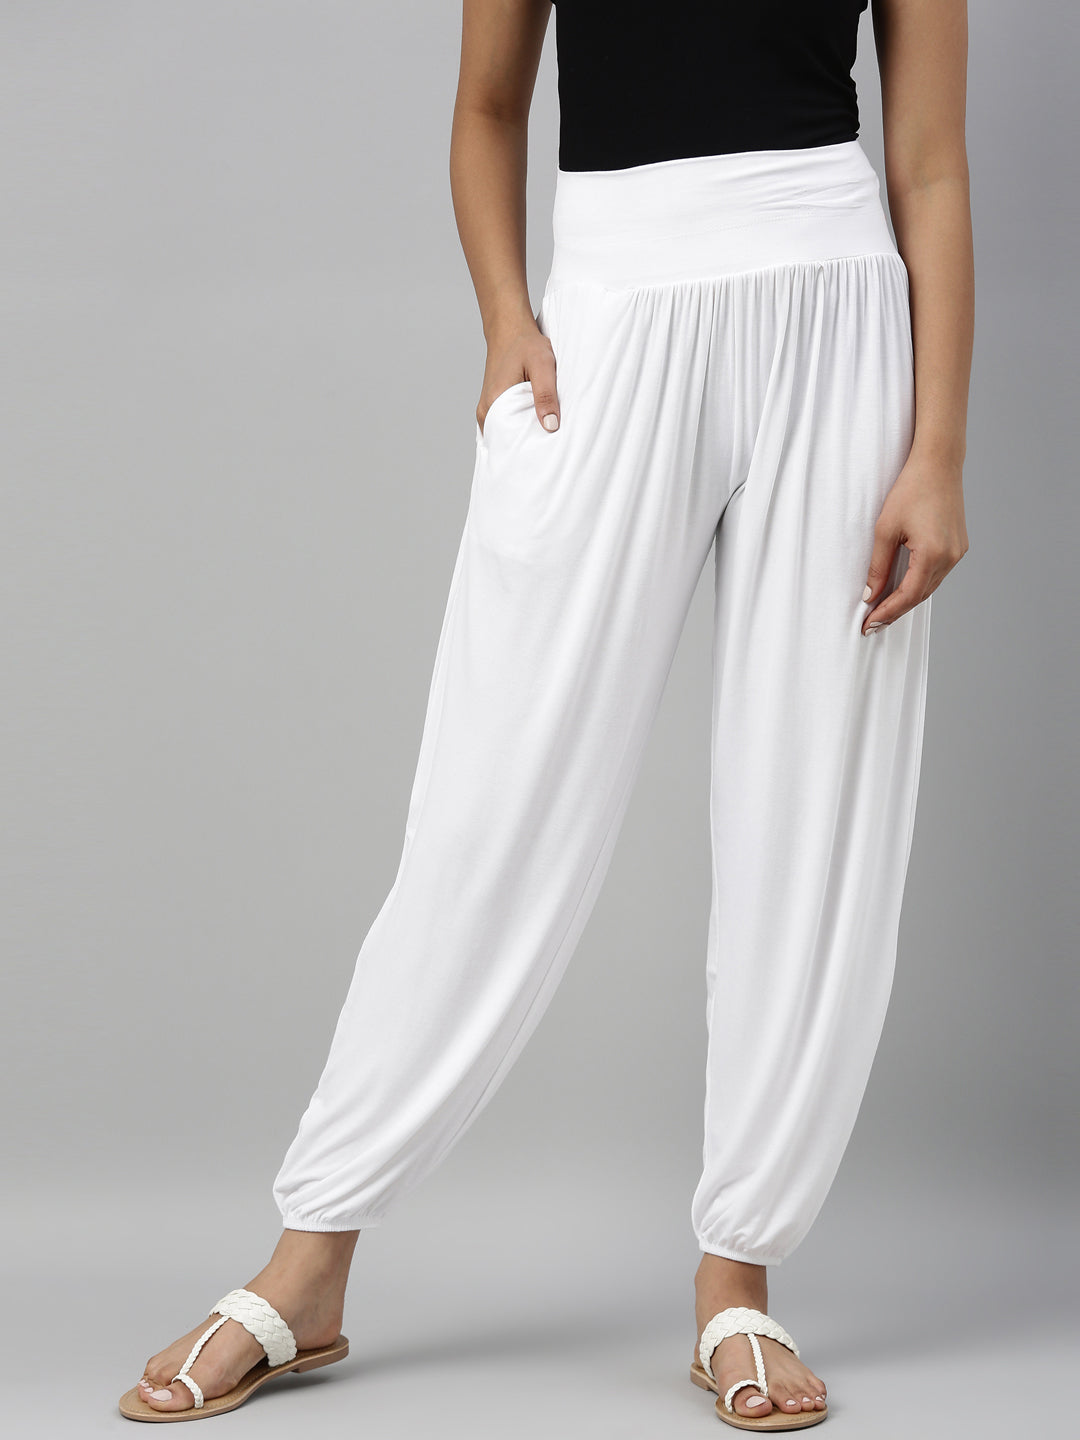 Buy All About You White Harem Pants - Harem Pants for Women 1526482 | Myntra